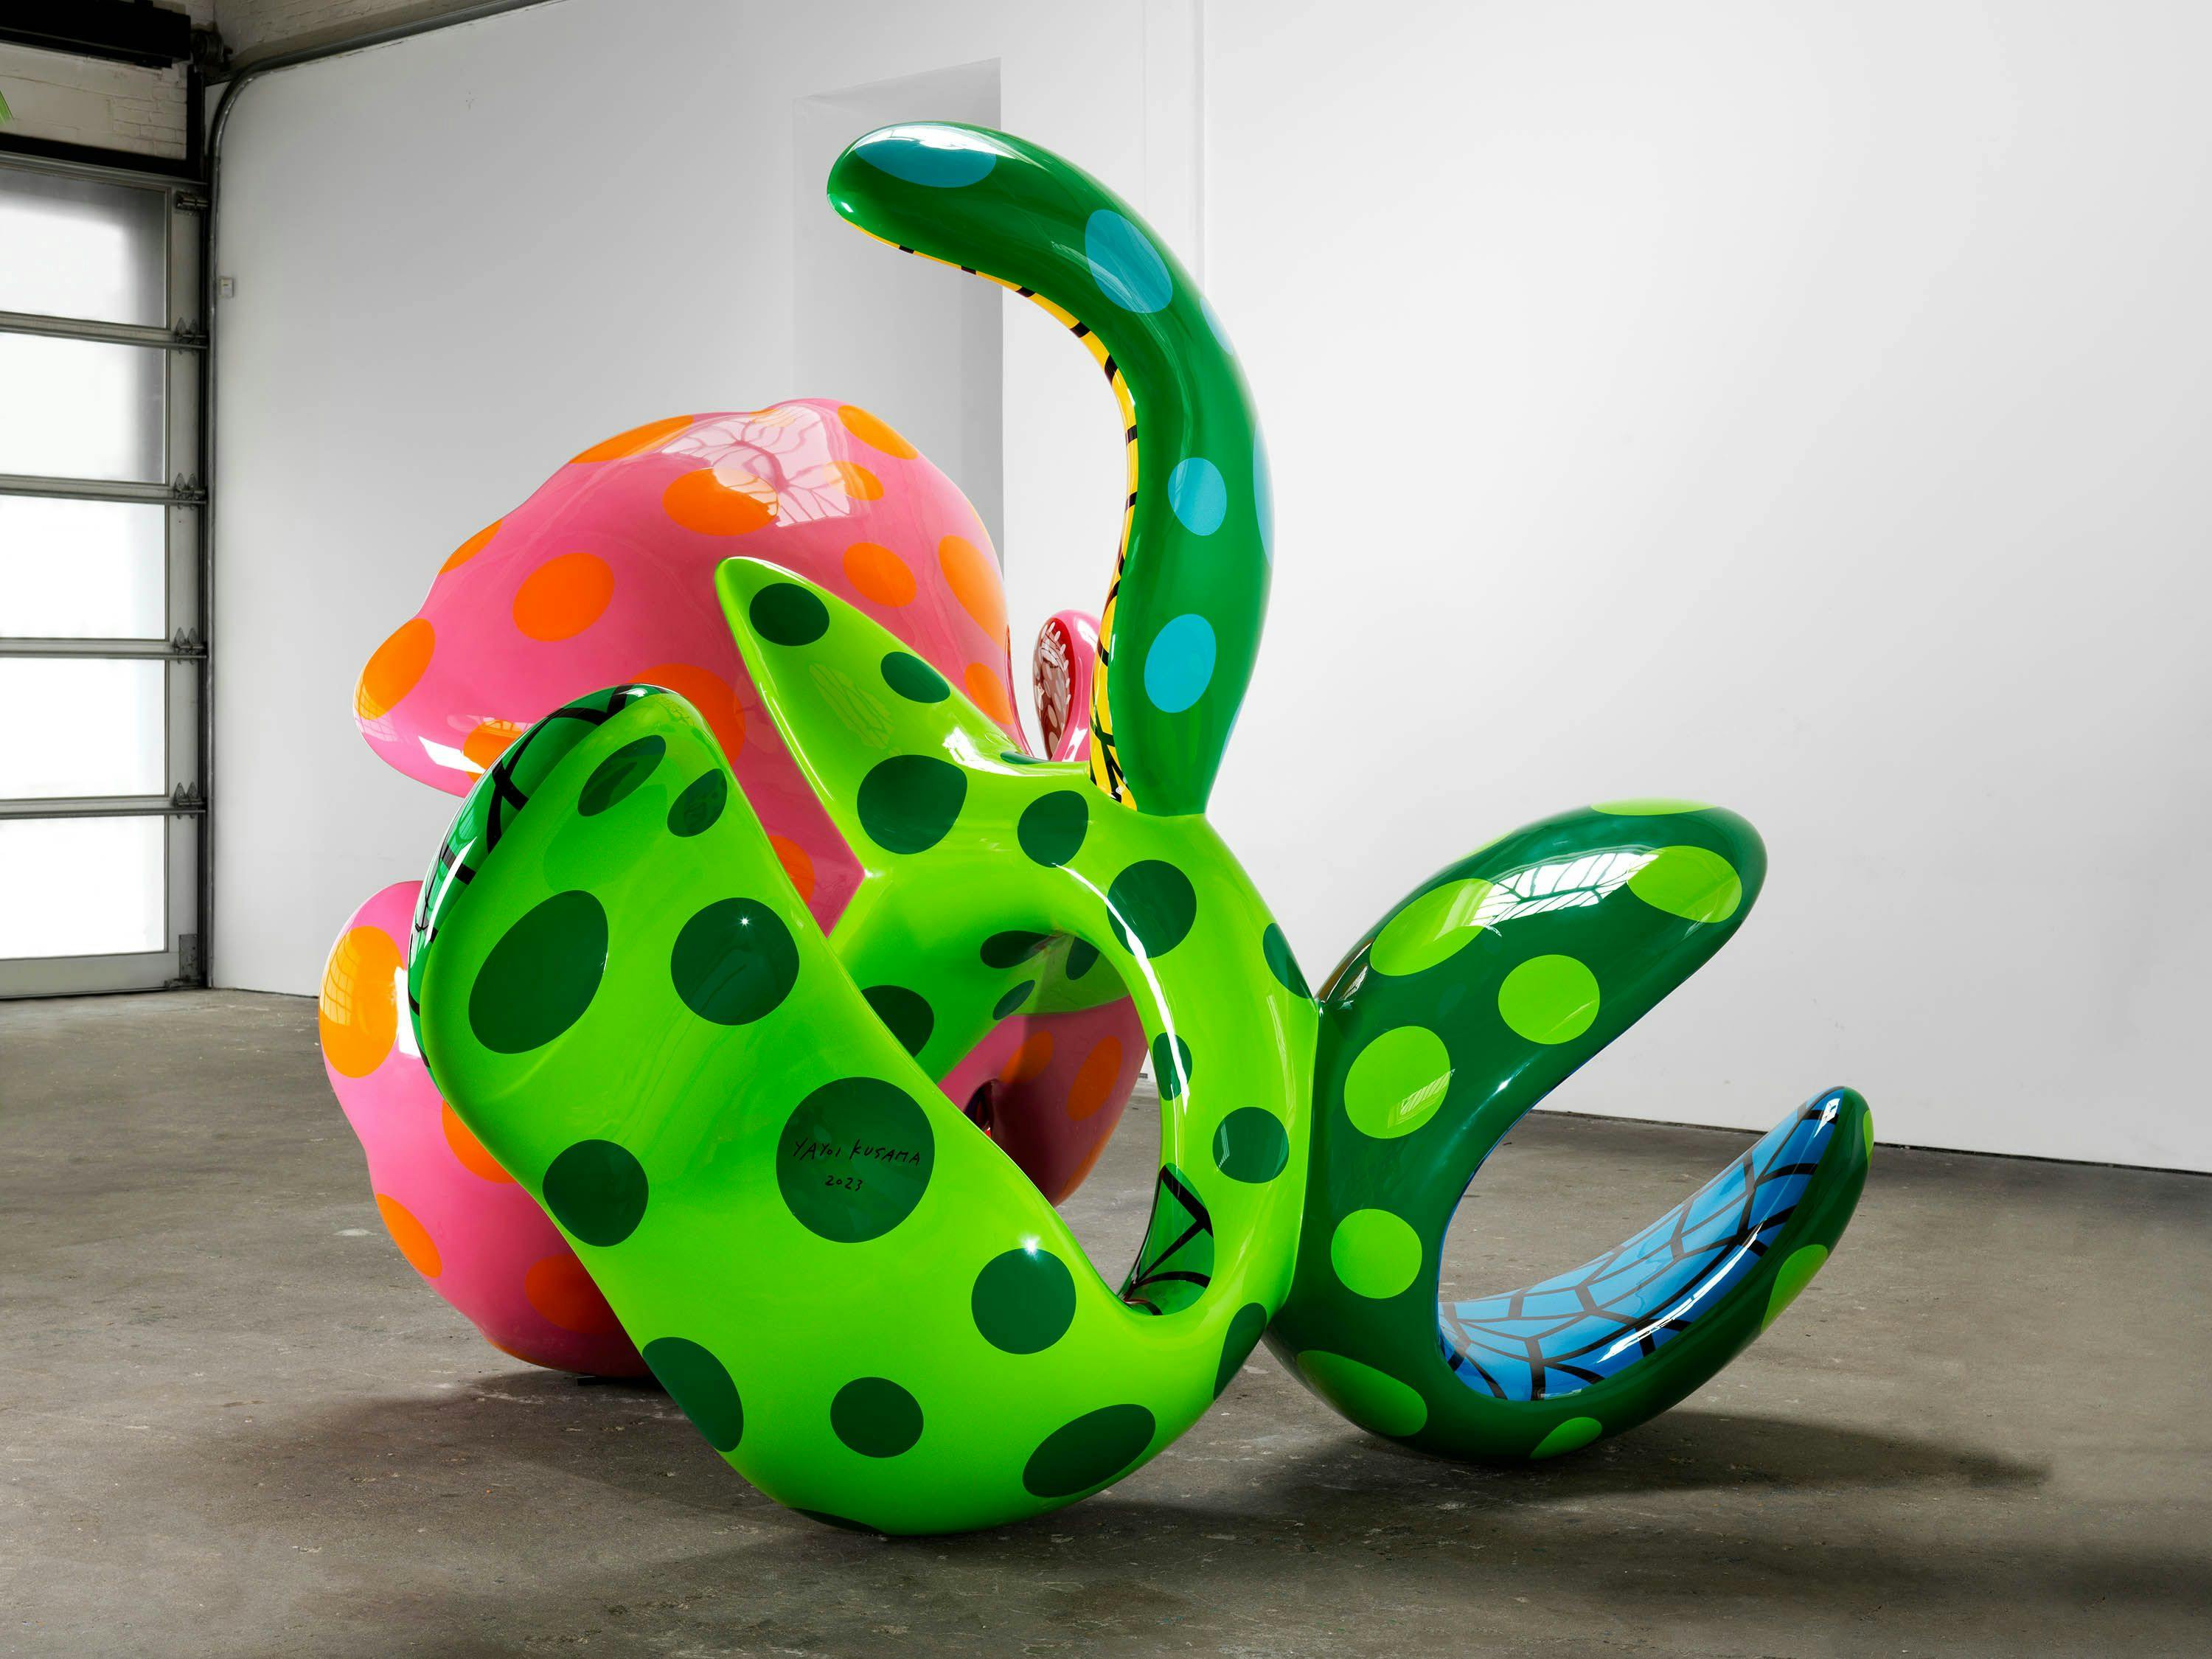 A sculpture by Yayoi Kusama, titled I Spend Each Day Embracing Flowers, dated 2023.